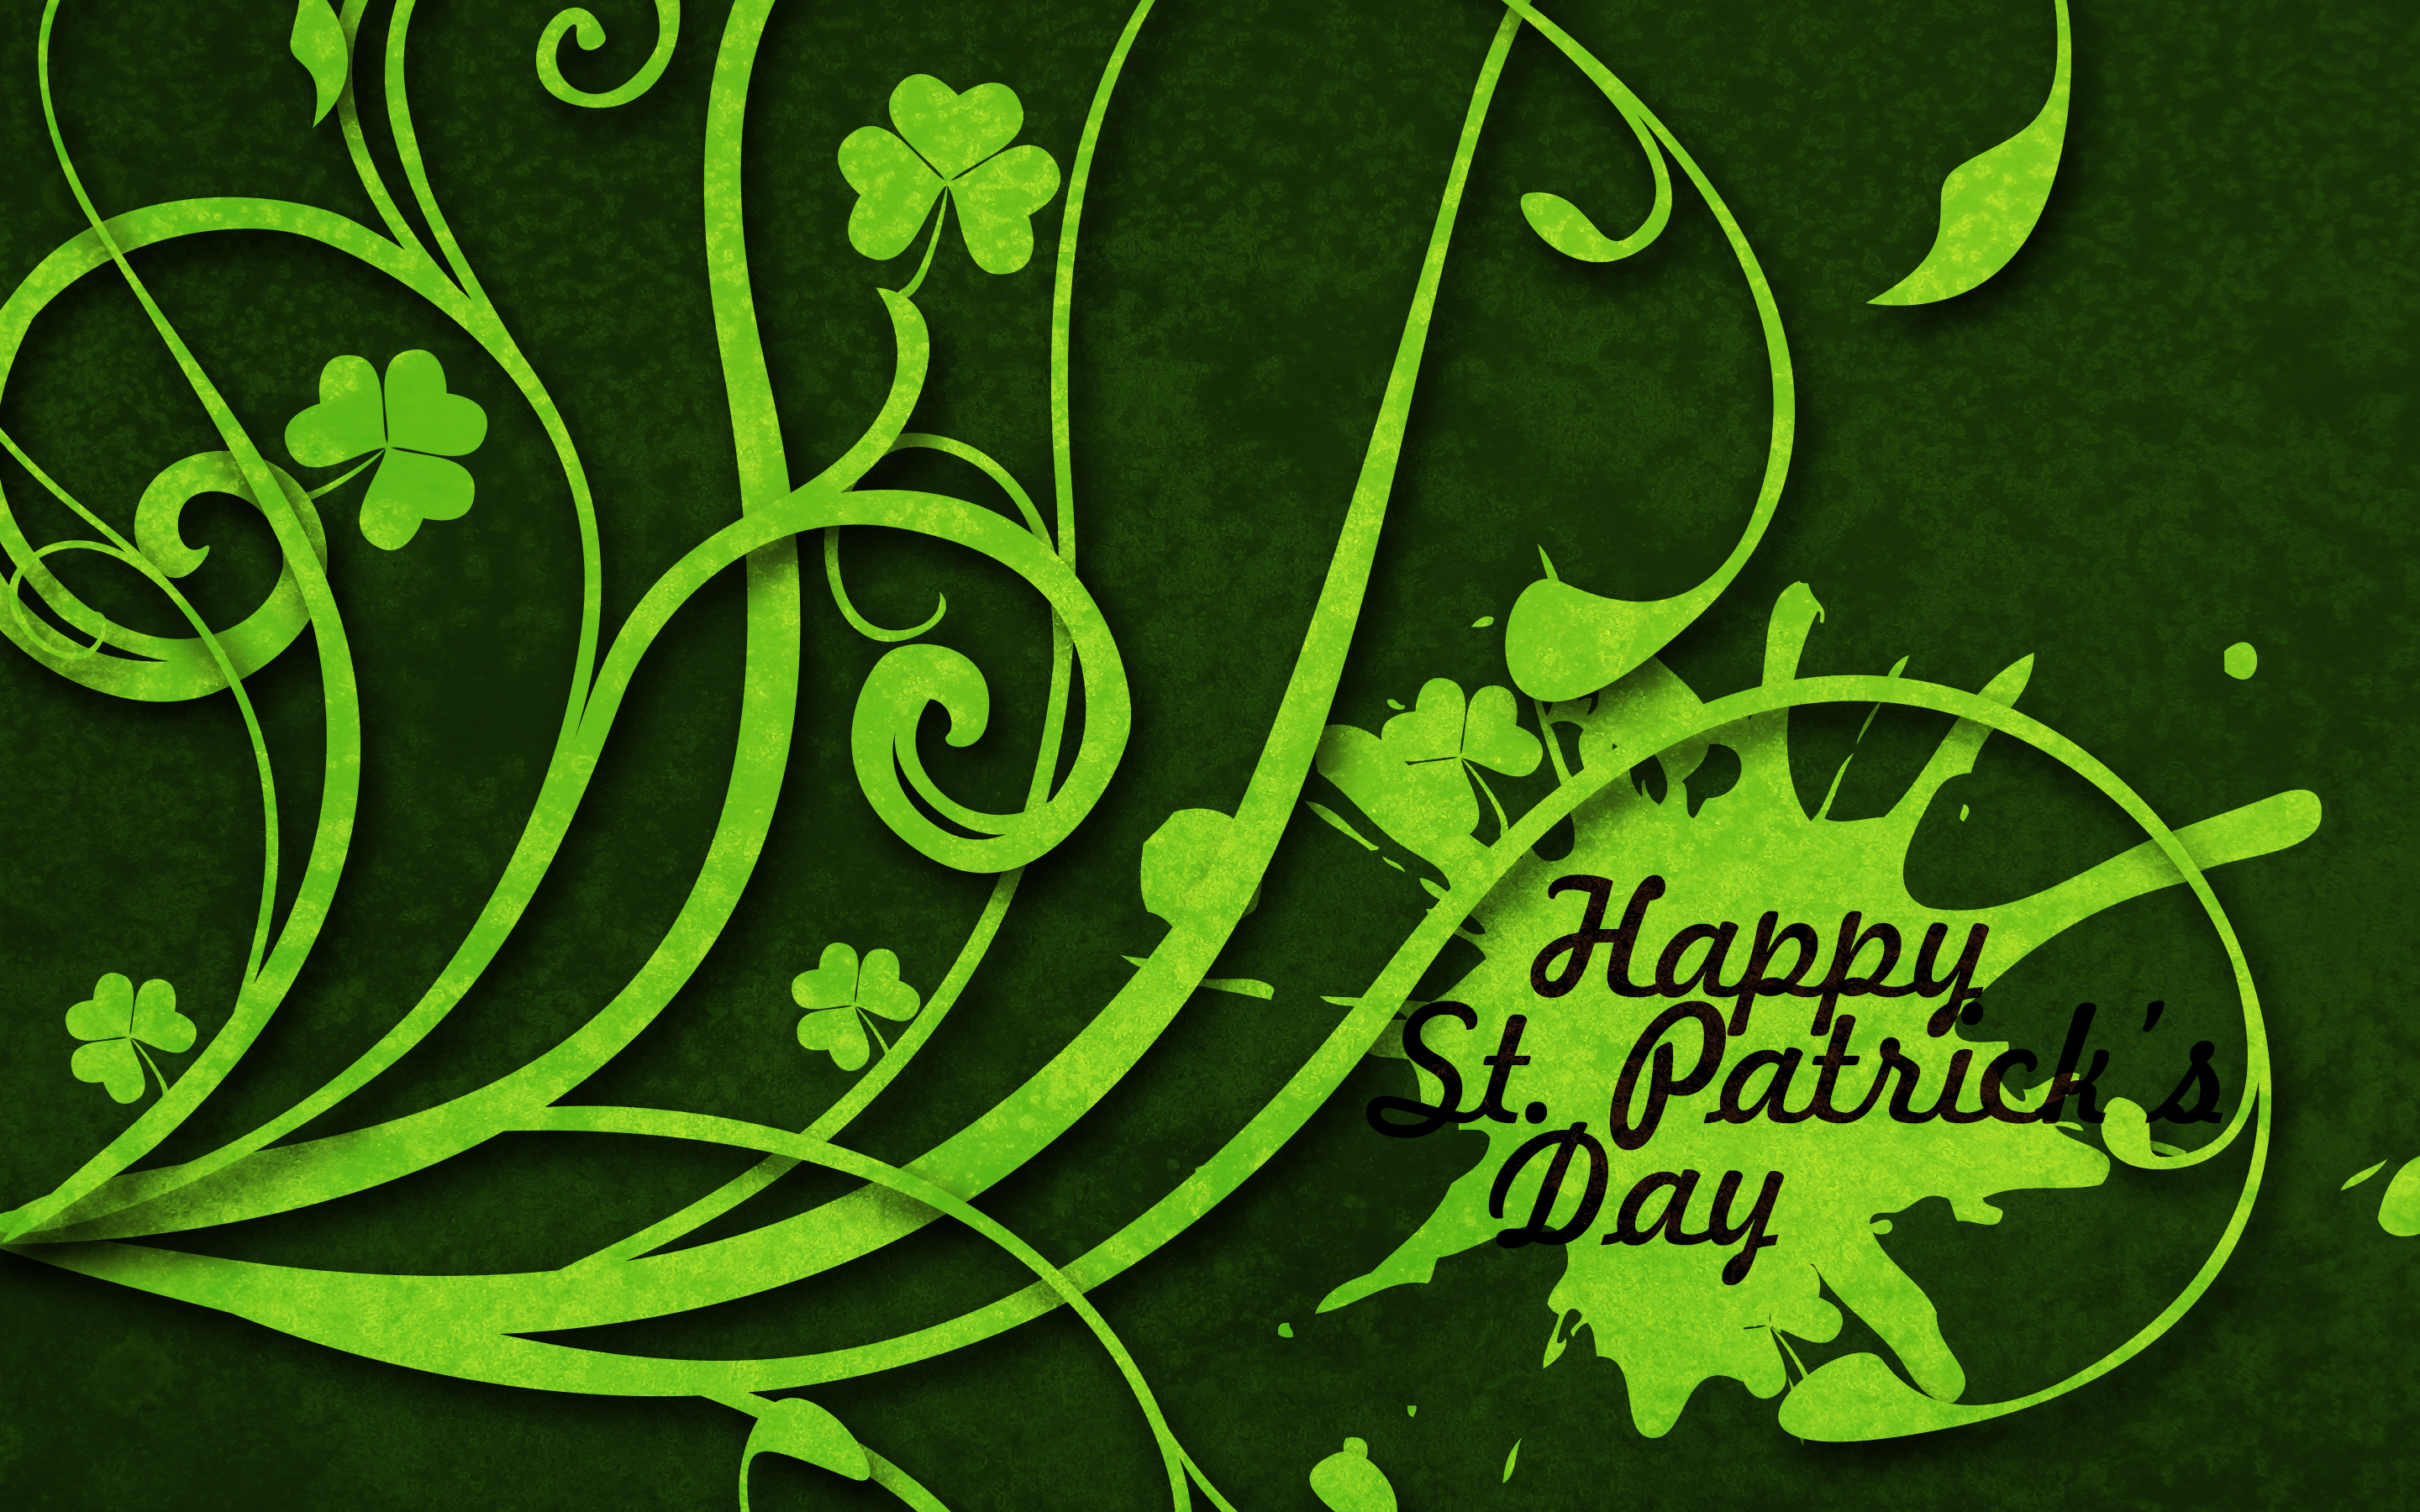 holiday, st patrick's day, green High Definition image